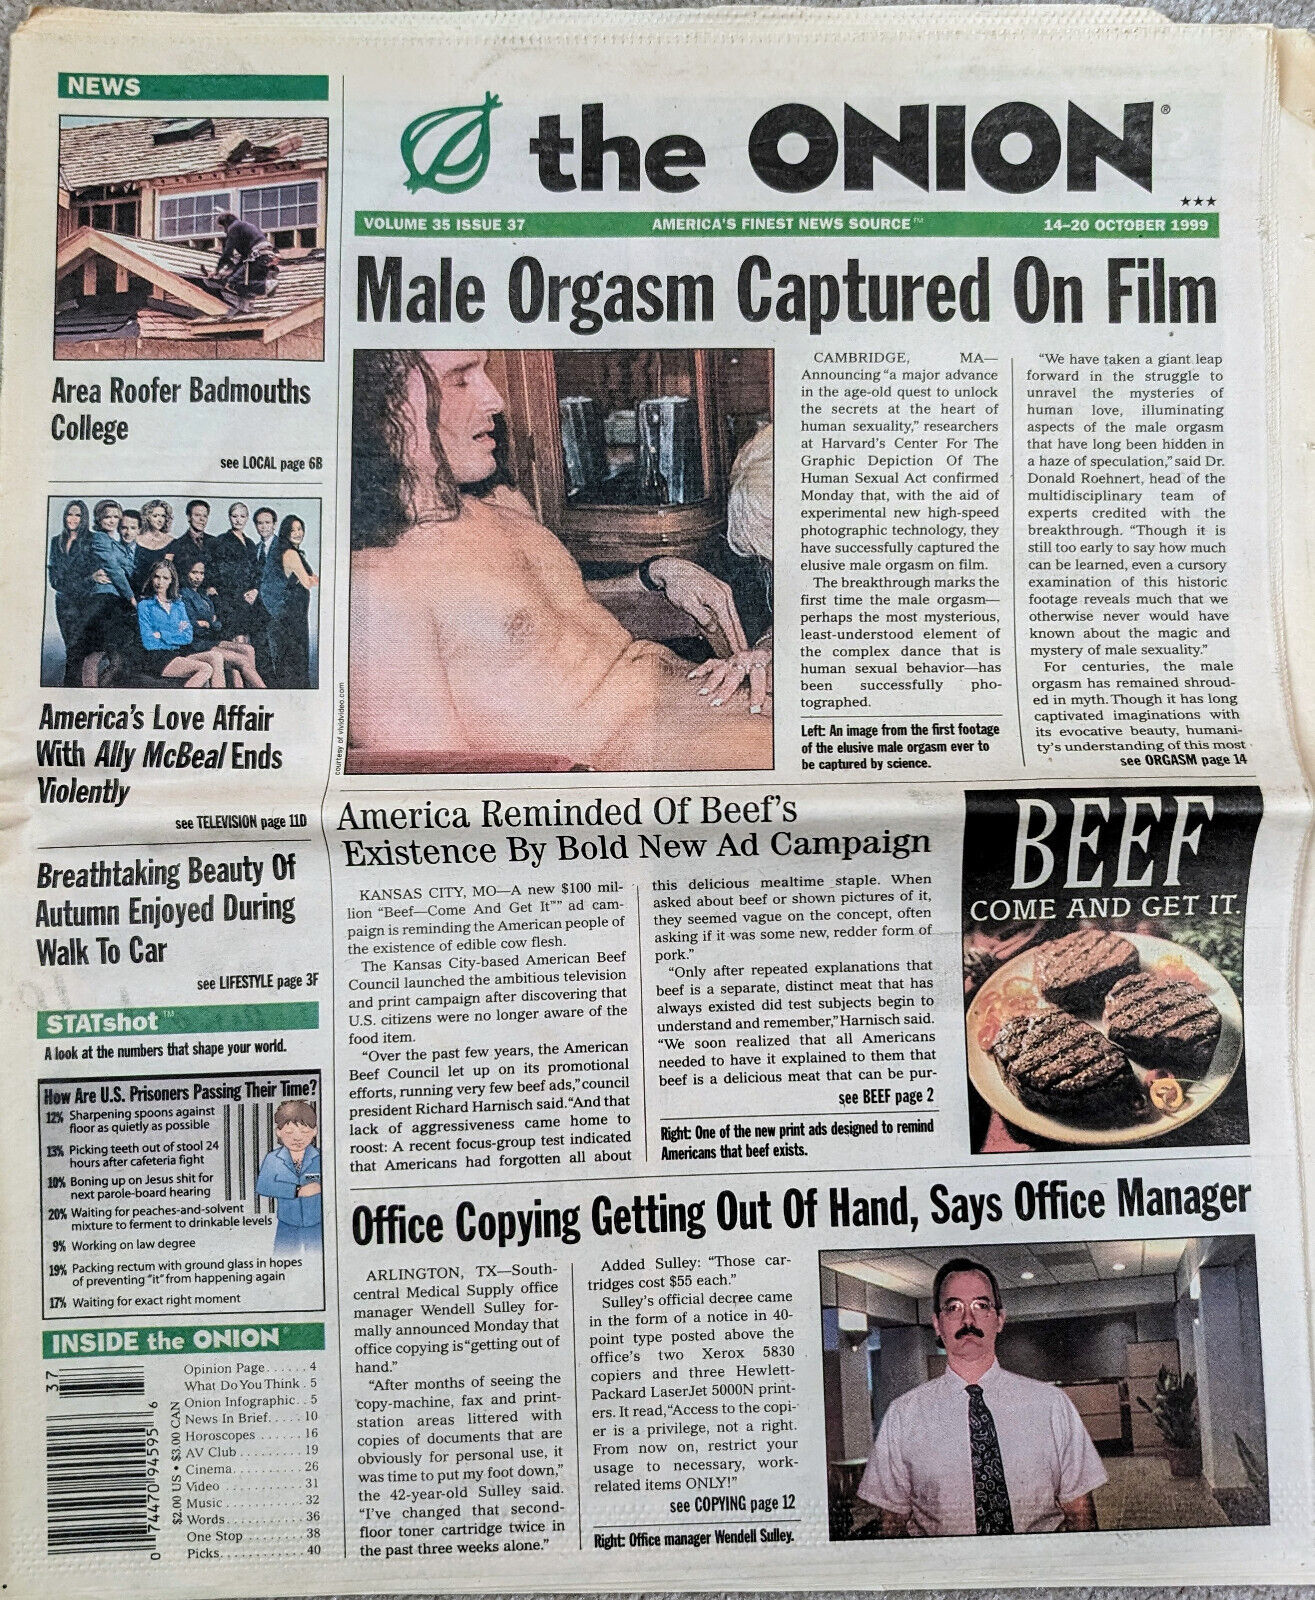 The Onion Newspaper - Volume 35 Issue 37 - October 1999 Vintage